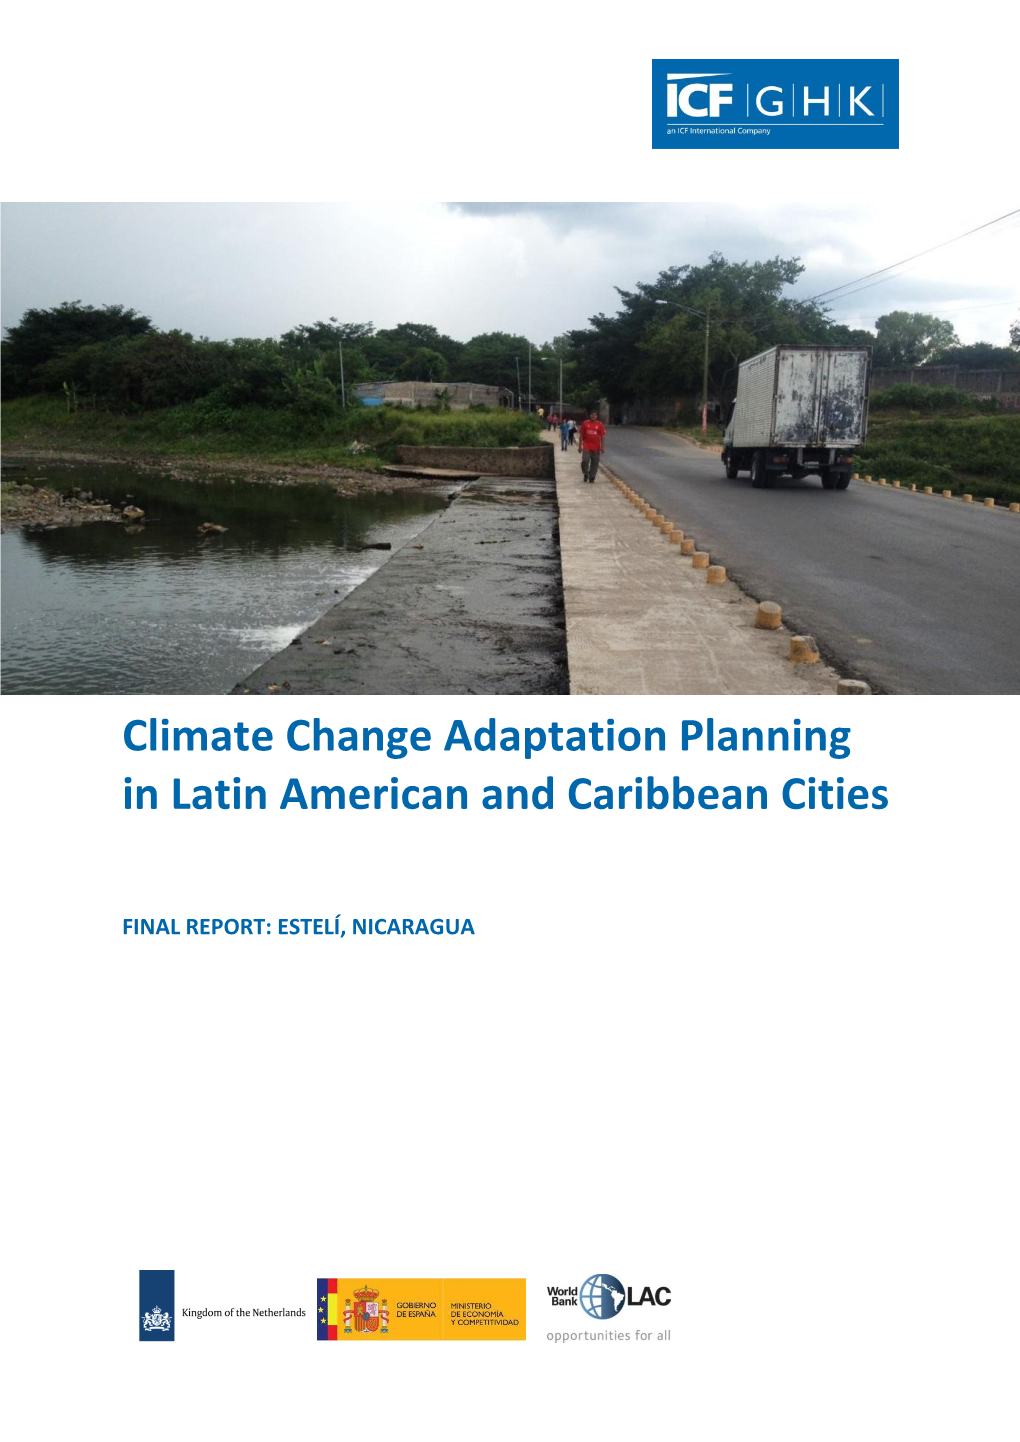 Climate Change Adaptation Planning in Latin American and Caribbean Cities